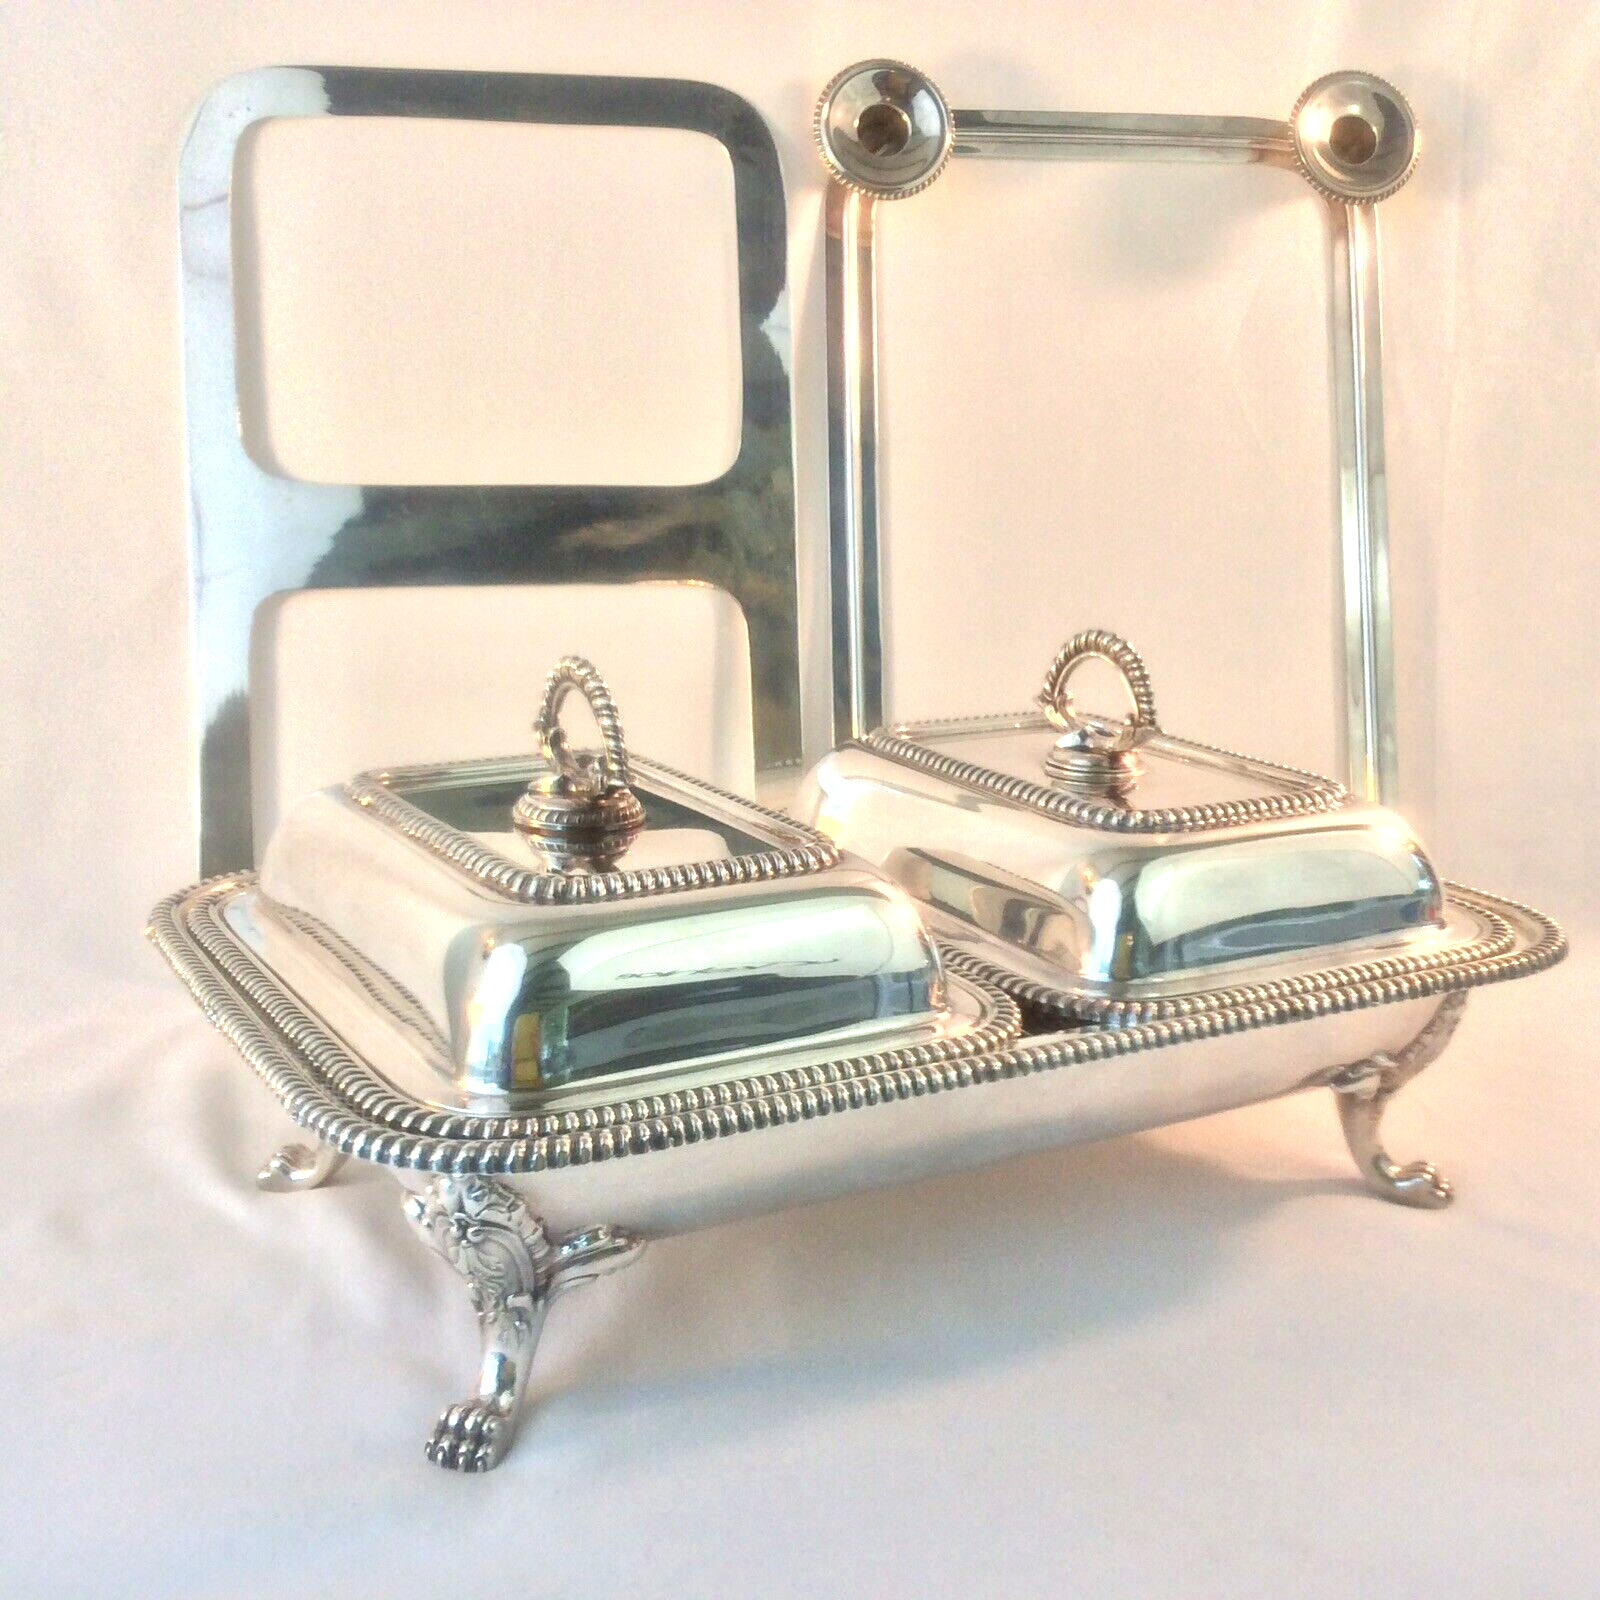 EGW & SONS INTL SILVER CO CLAW FOOT BUFFET SERVER 9 PC MULTIPURPOSE GADROON 3112